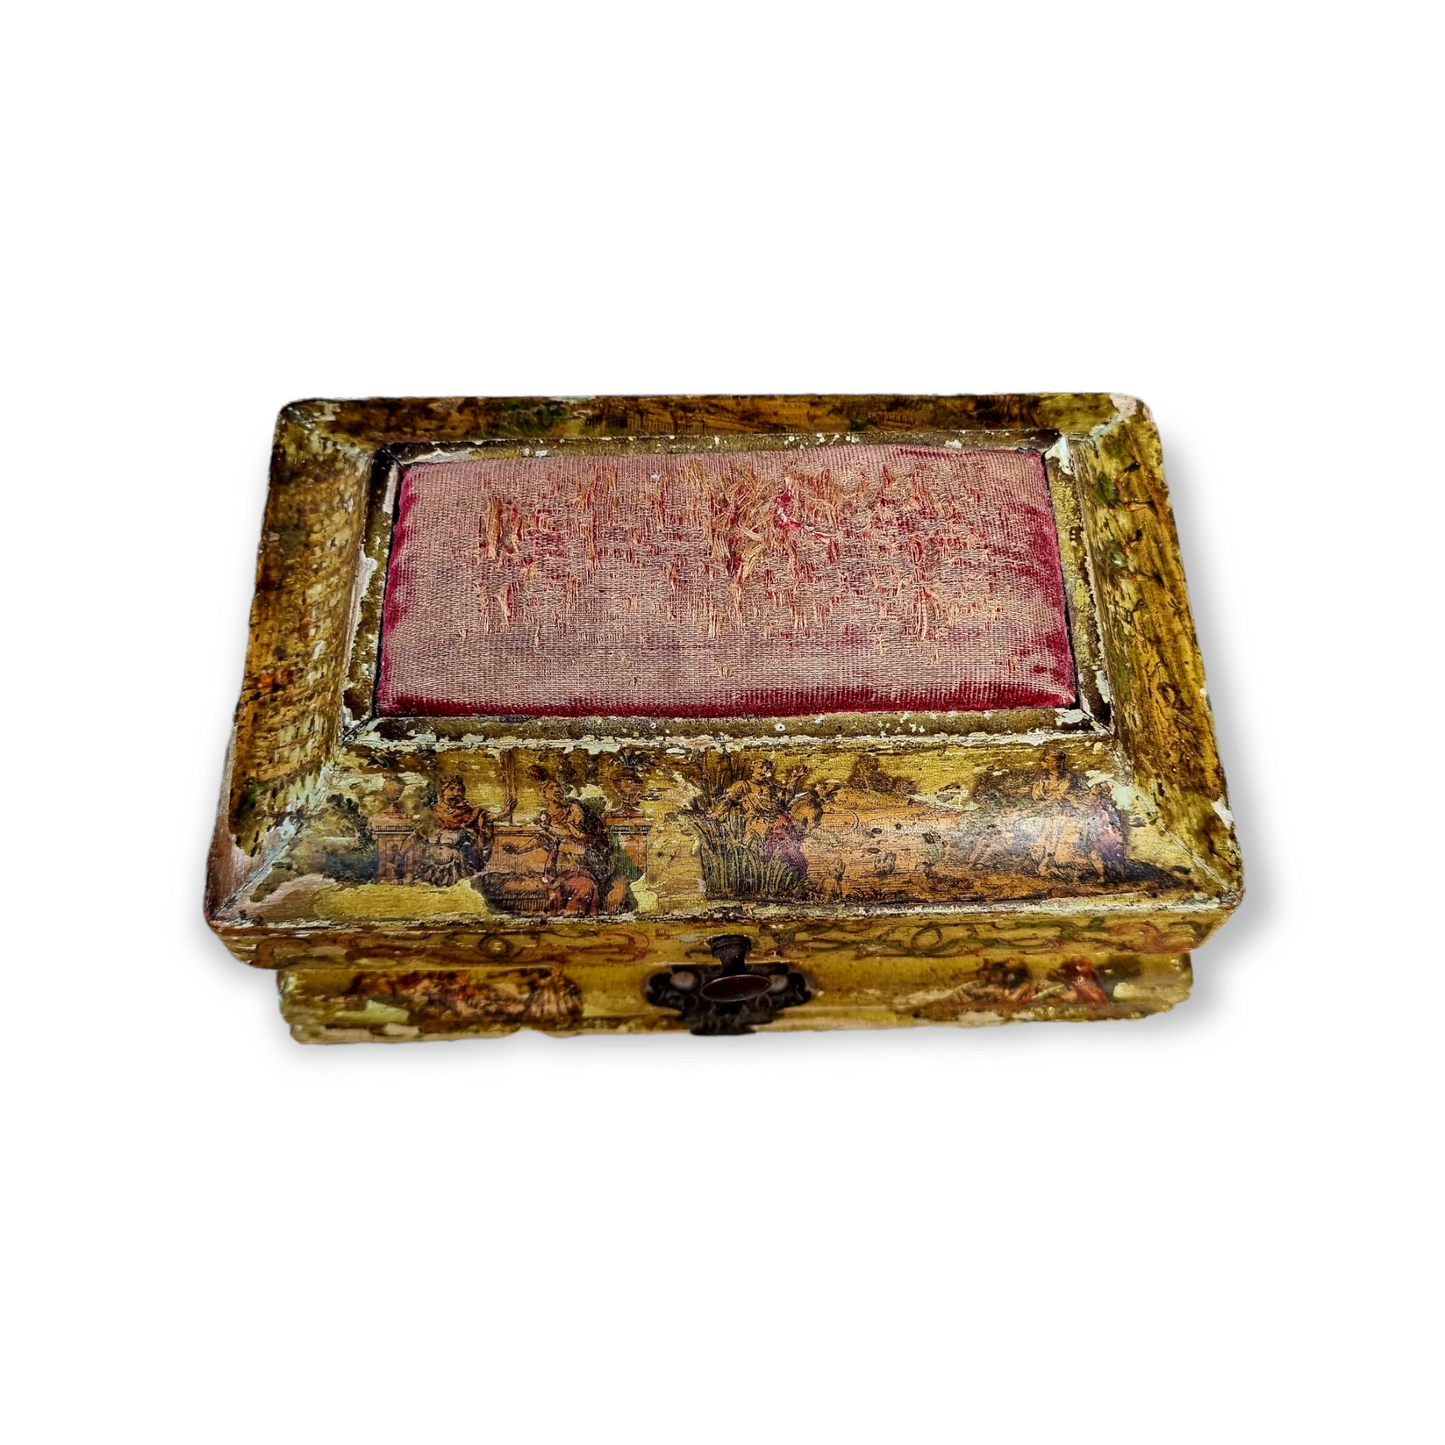 18th Century Italian Antique Box With Decoupage Decoration And Pincushion